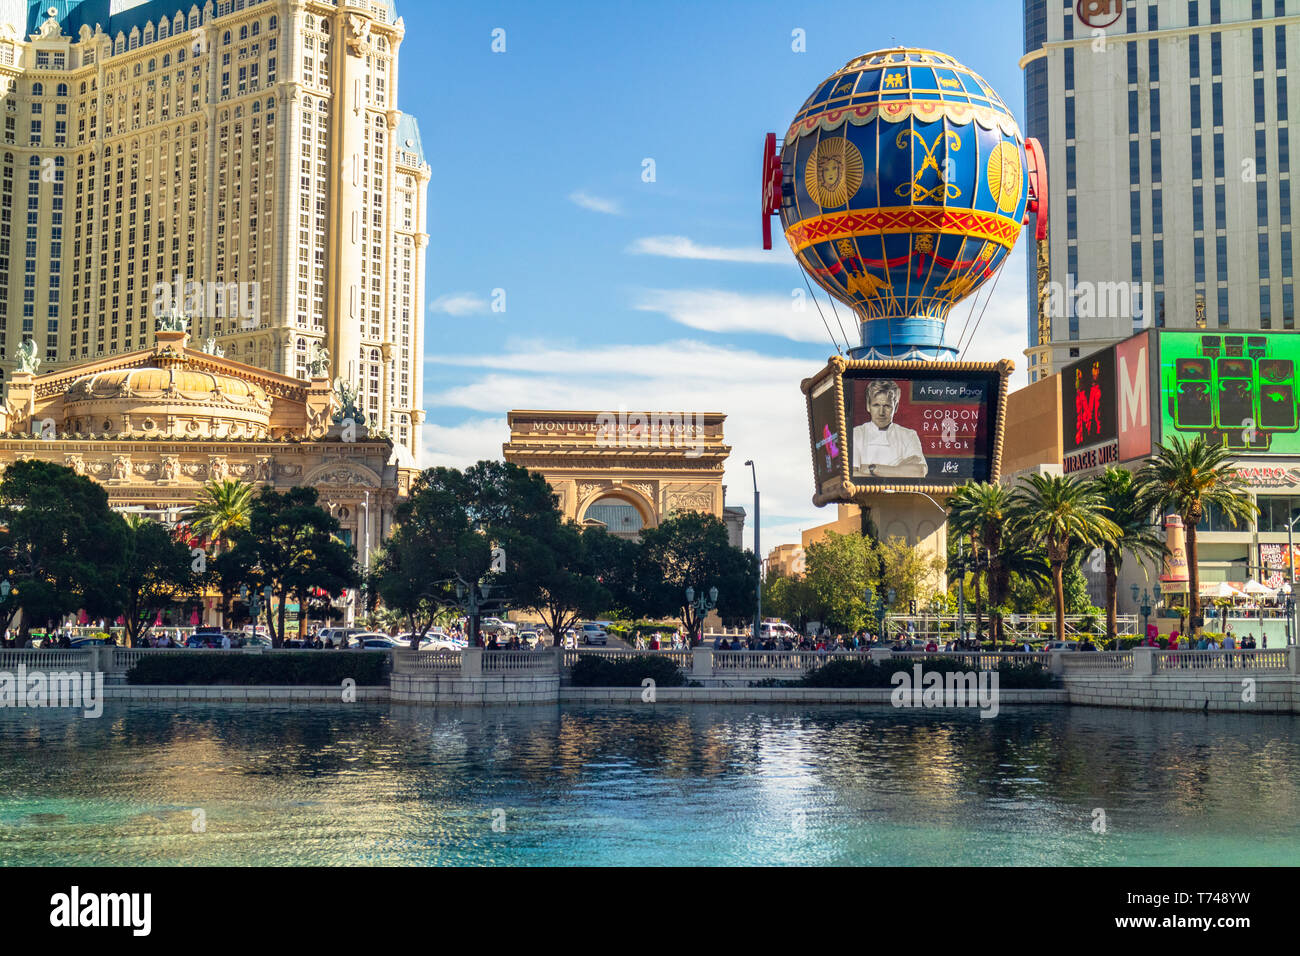 Bally's Hotel, Planet Hollywood Hotel and Casino, and Paris Hotel and Casino, Montgolfier Balloon with the Theme of Paris.Las Vegas, November 19, 2016 Stock Photo